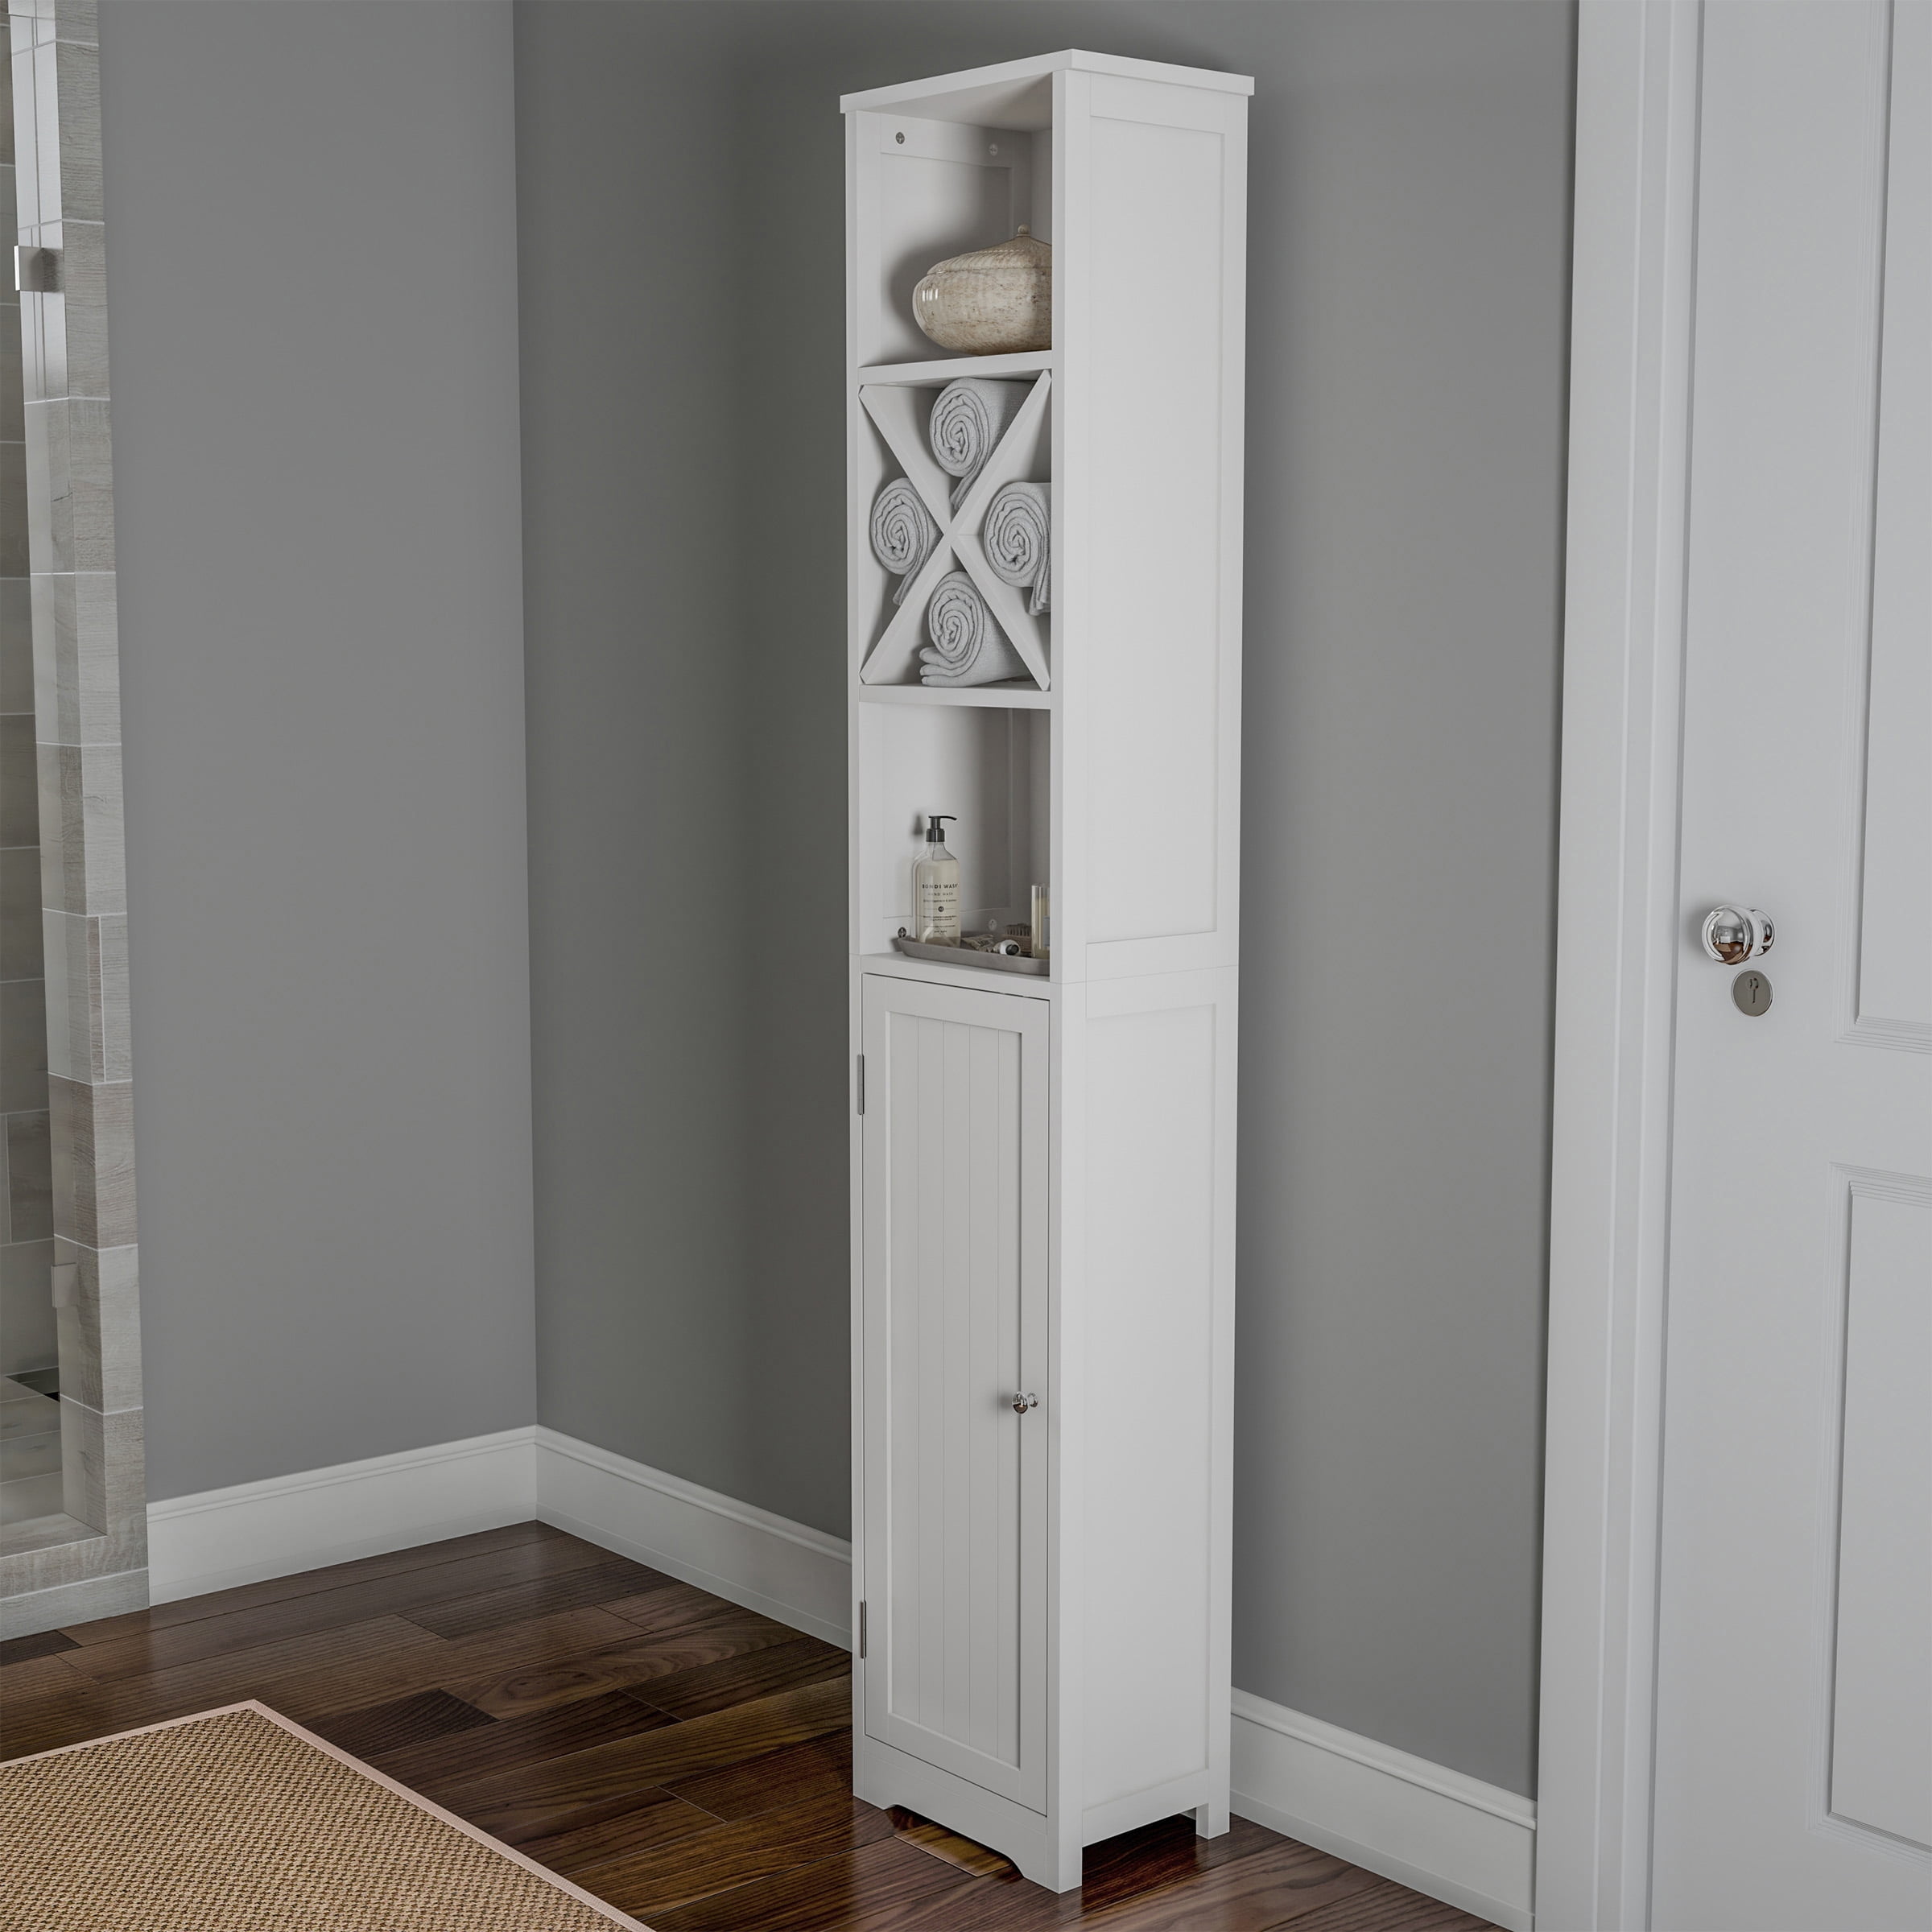 Spirich Home Bathroom Freestanding Storage Cabinet with Two Tier Open Shelves Tall Slim Cabinet with Door and Drawer White Free Standing Linen Tower